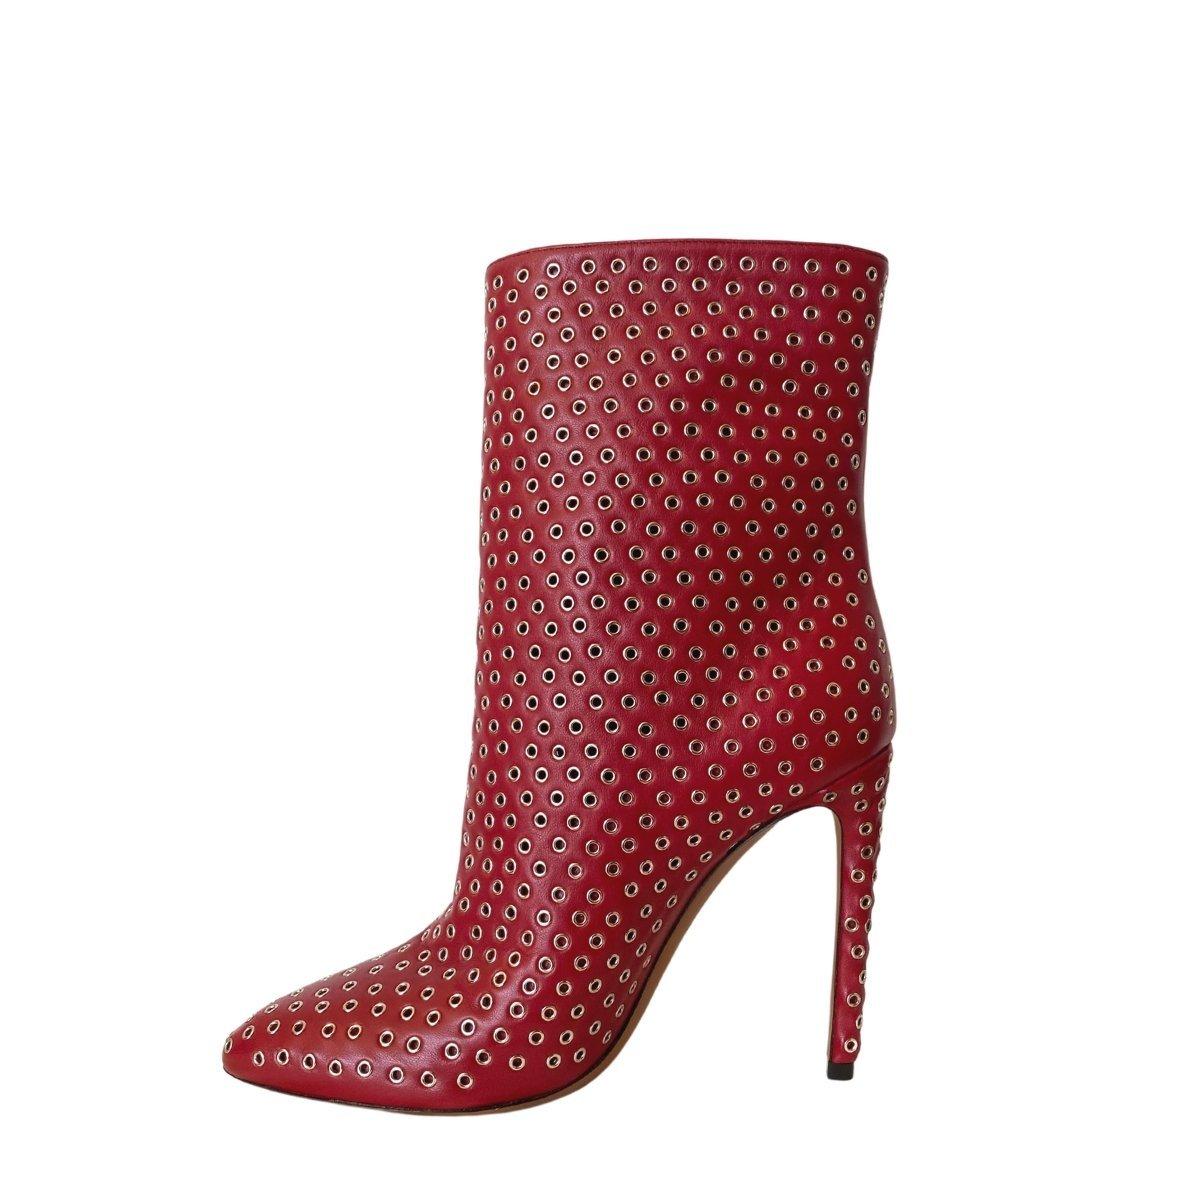 Alaia Scalloped Accent Boots
Soft leather boots with metal applications.
Solid color
Narrow toe line
Stiletto heel
Heel height: 4.25